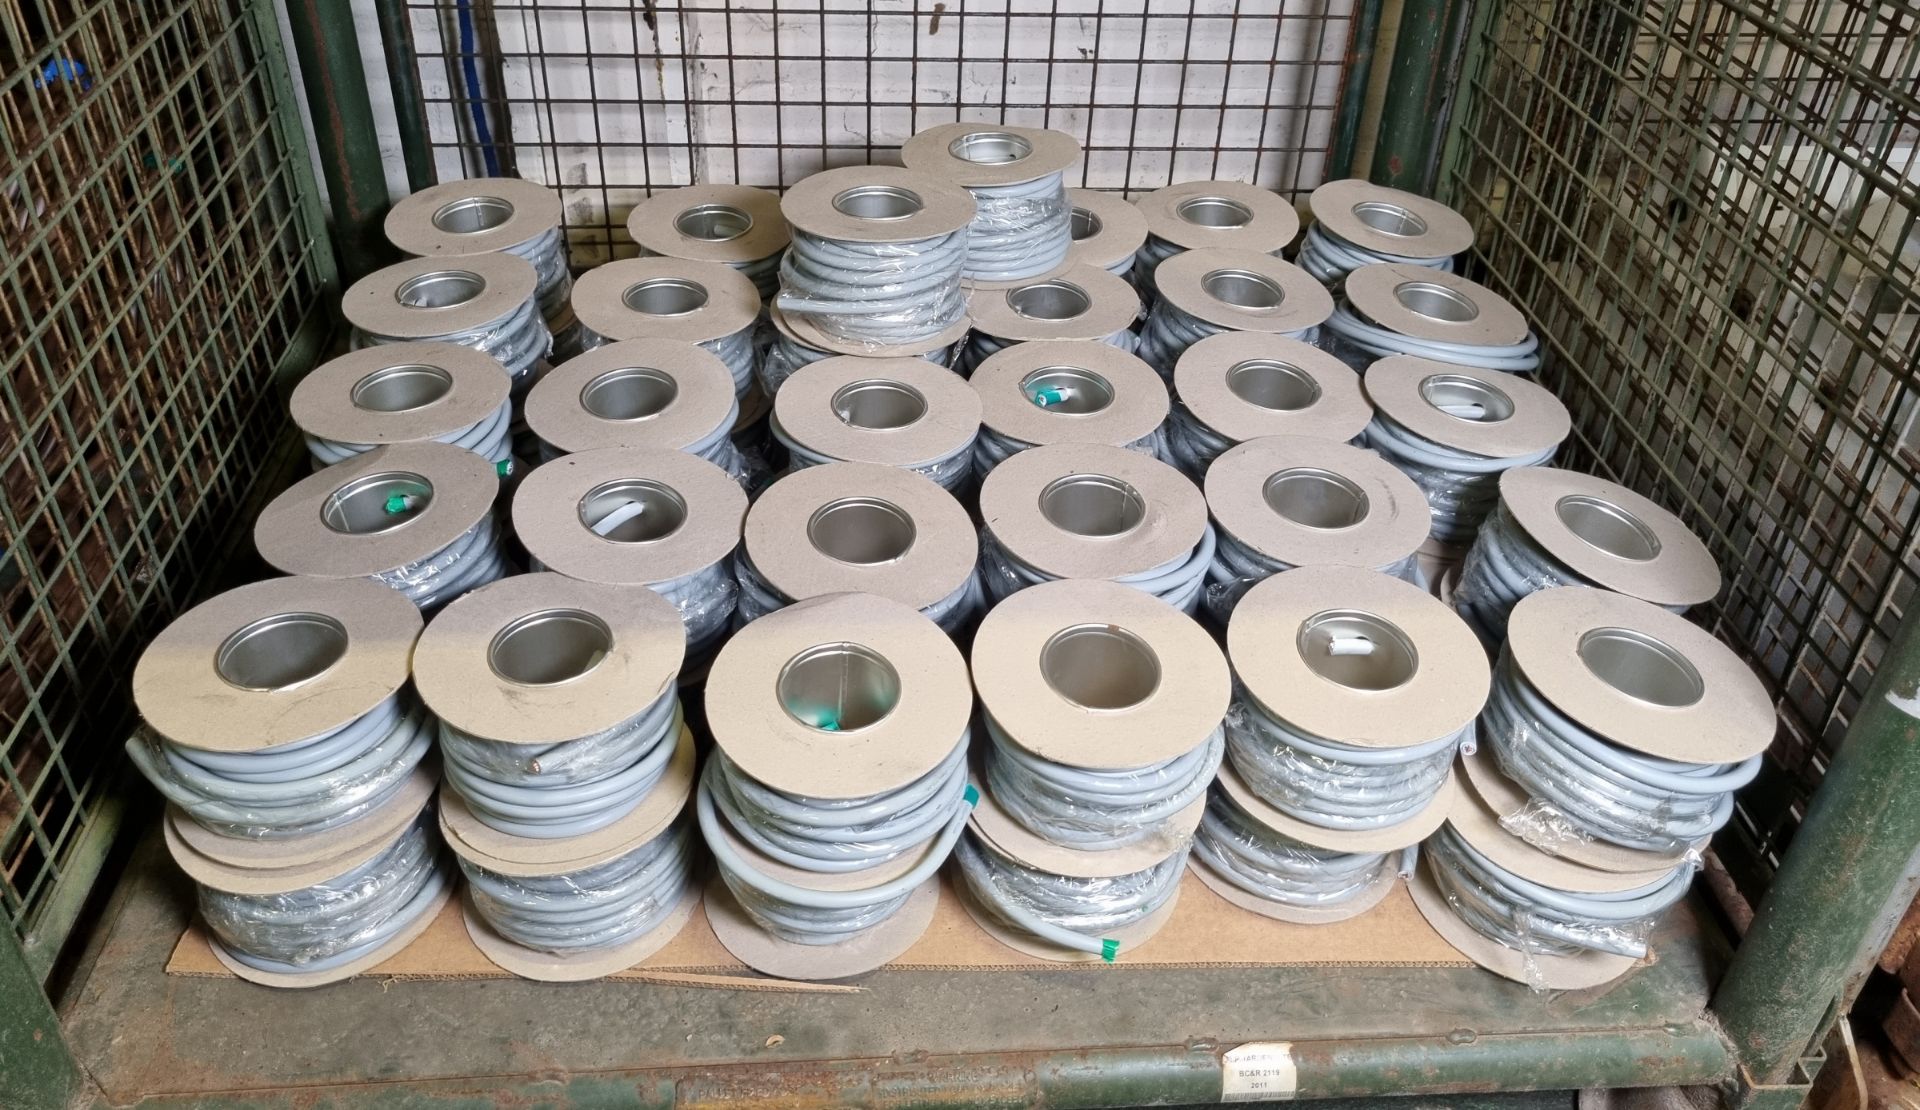 62x reels of 25mm double insulated single core cable - unknown length - 1 reel weighs 3.3kg - Image 2 of 3